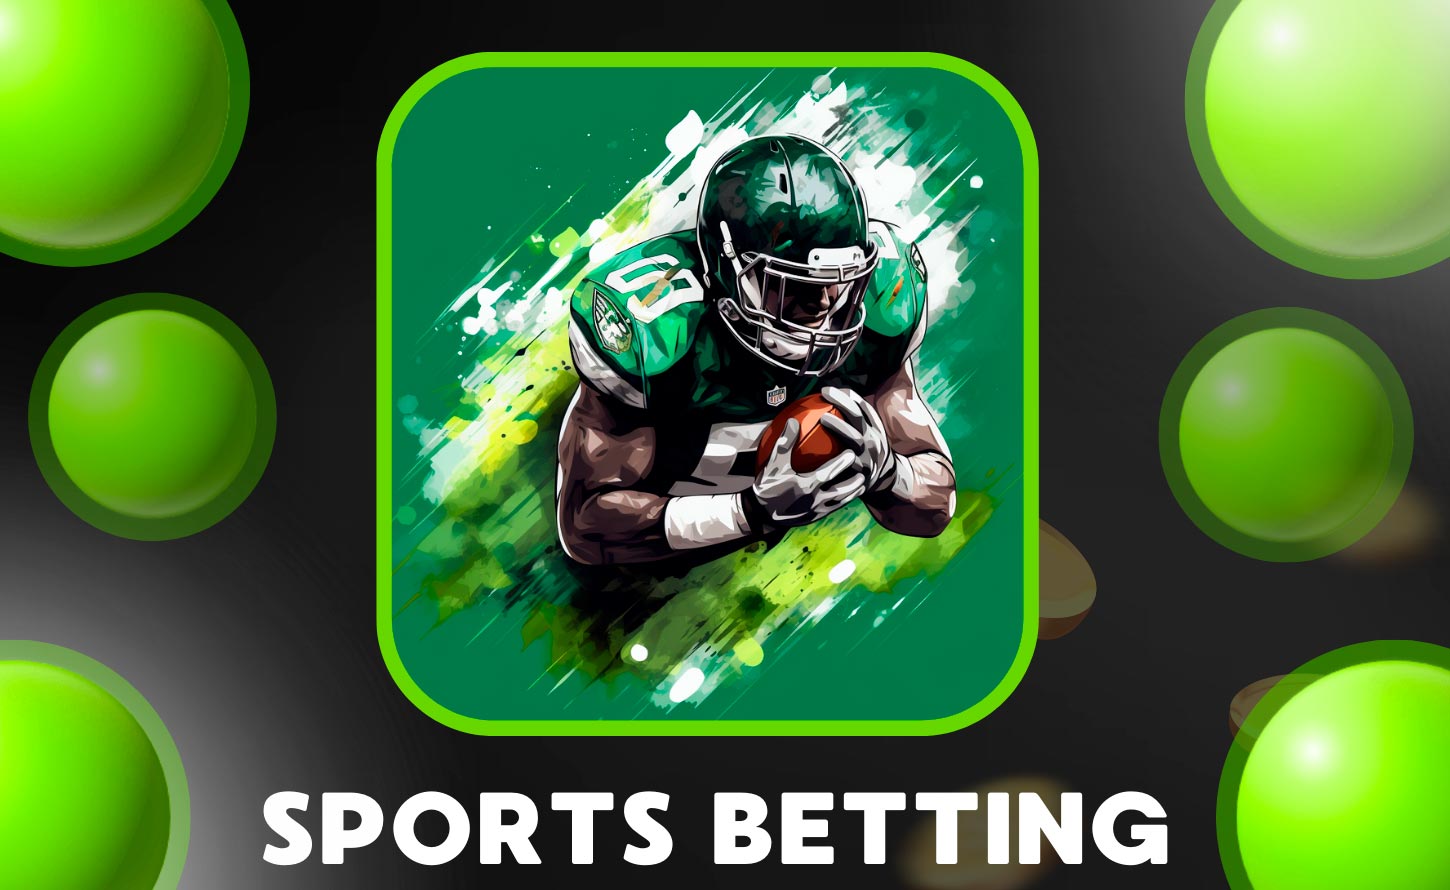 Winwin - Bet on Thousands of Sports Matches Every Day